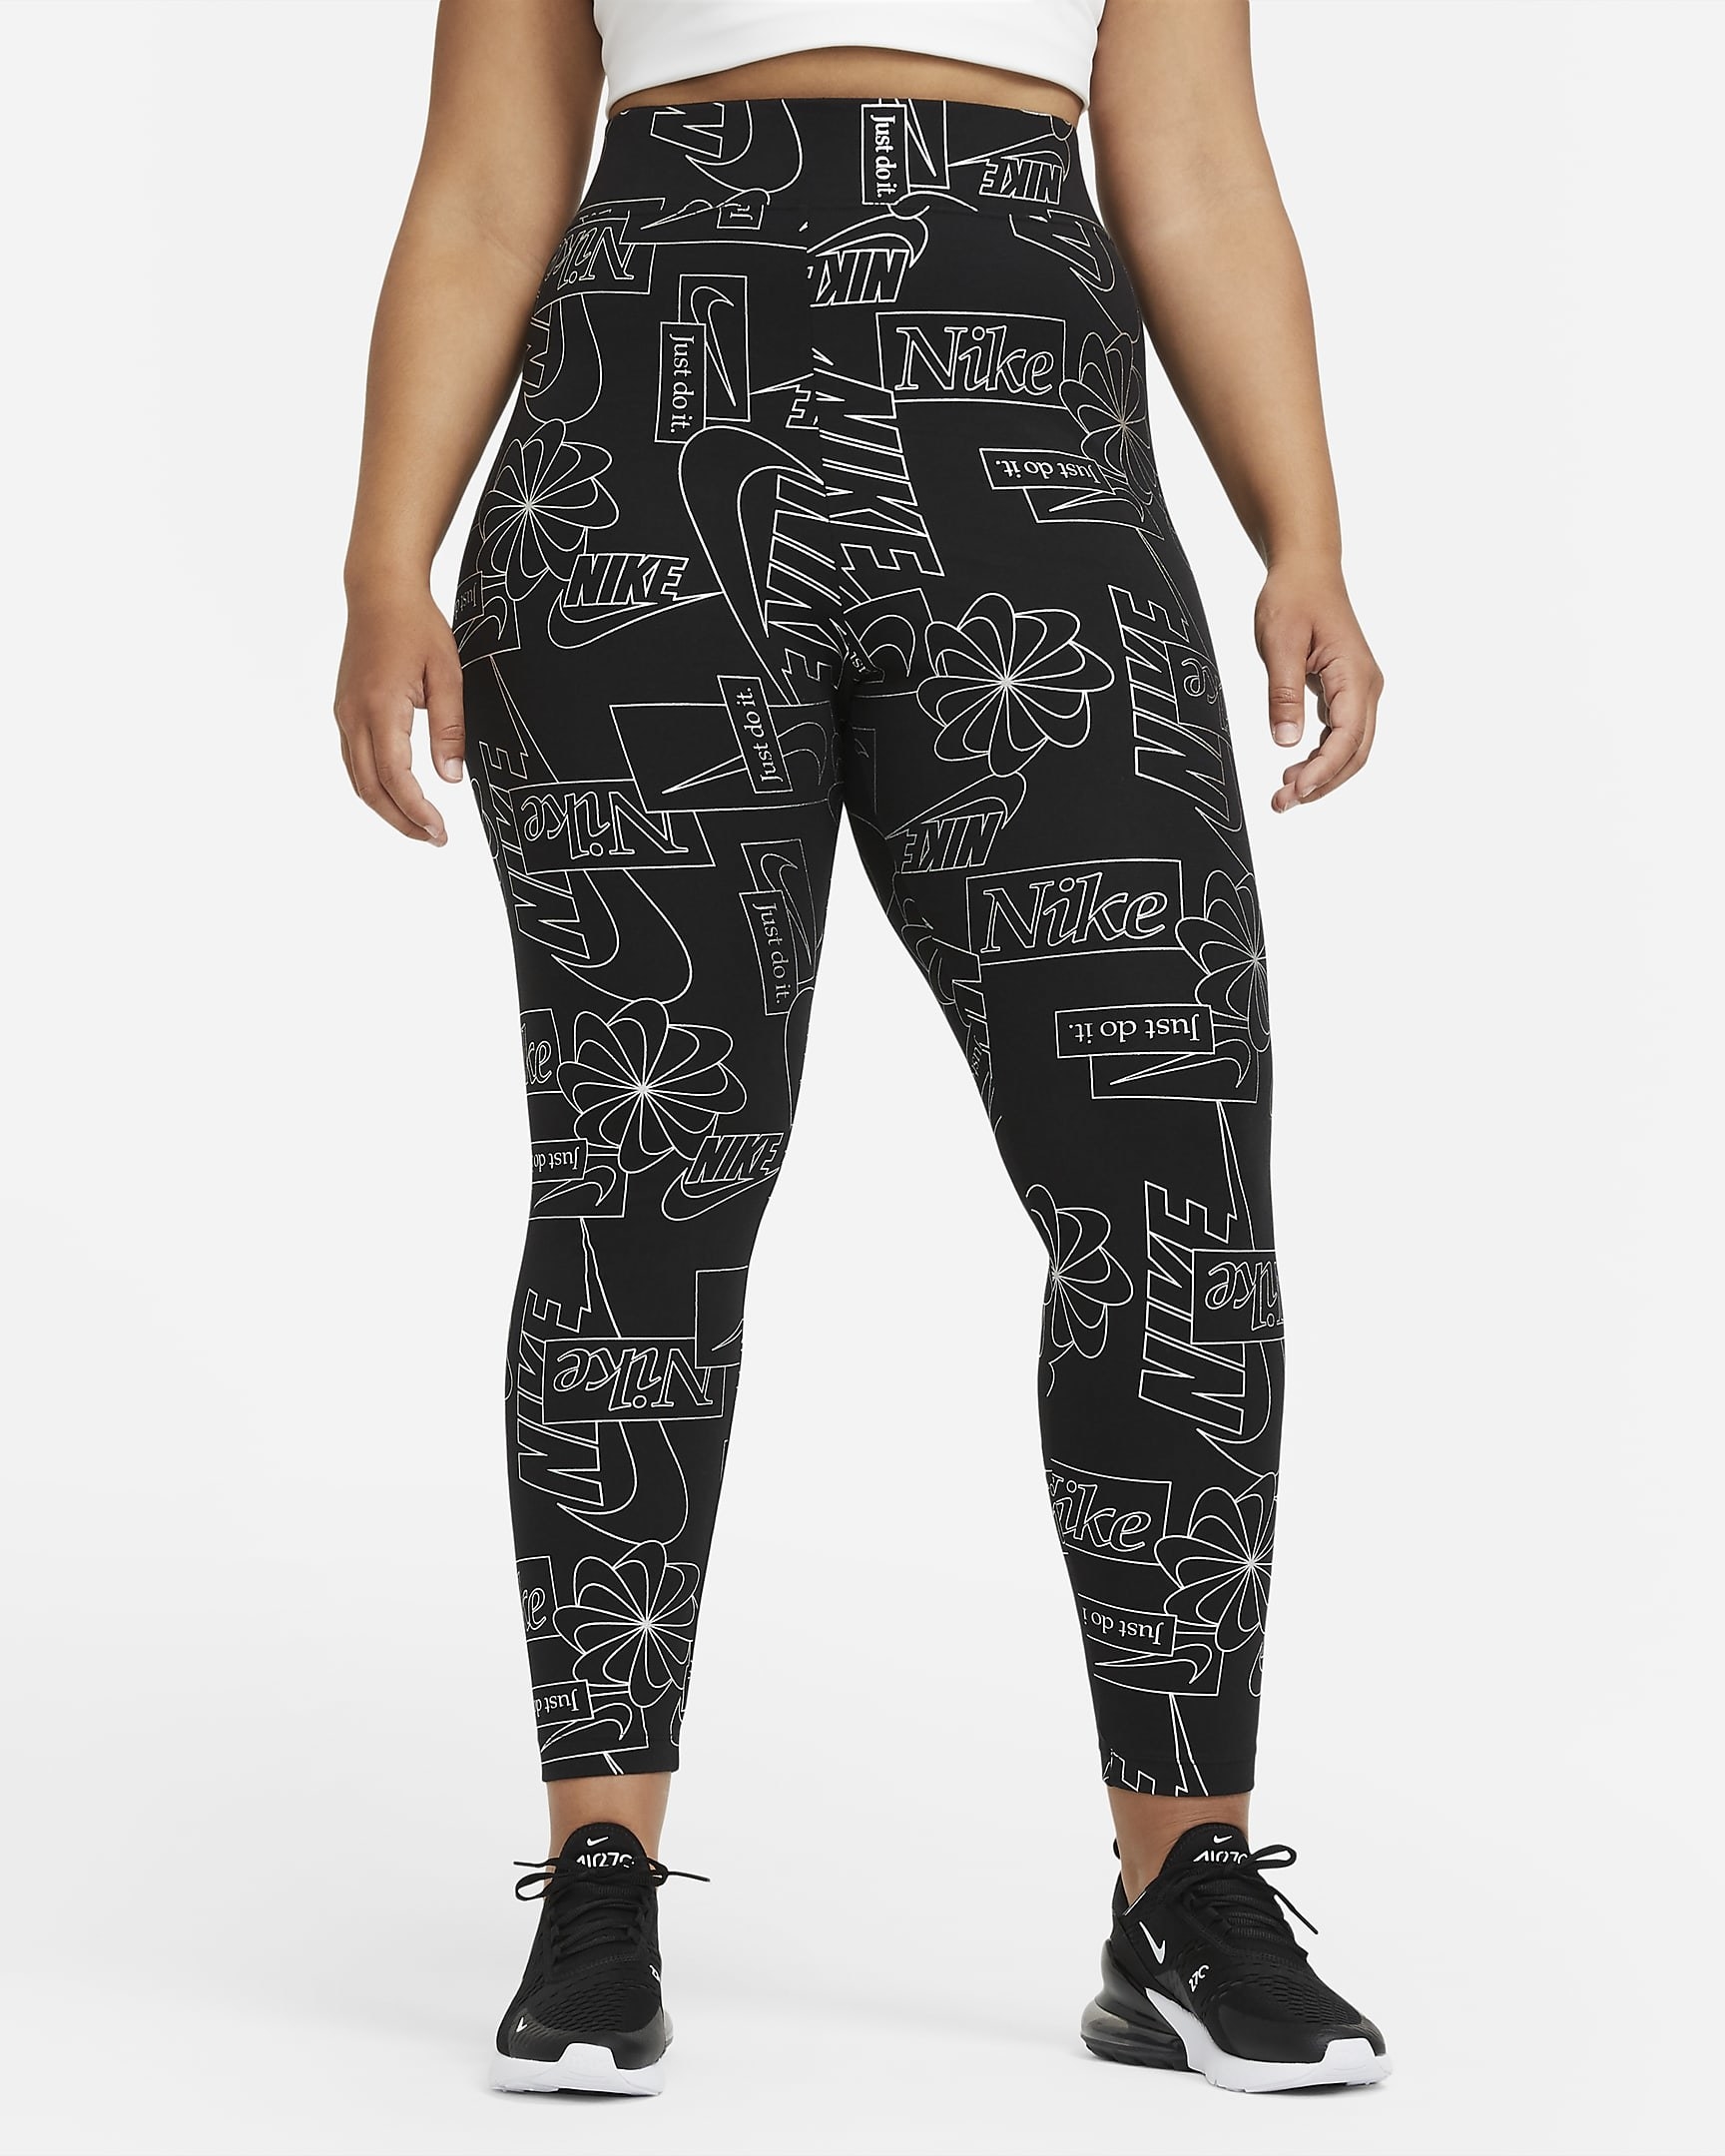 A person wearing leggings with a print